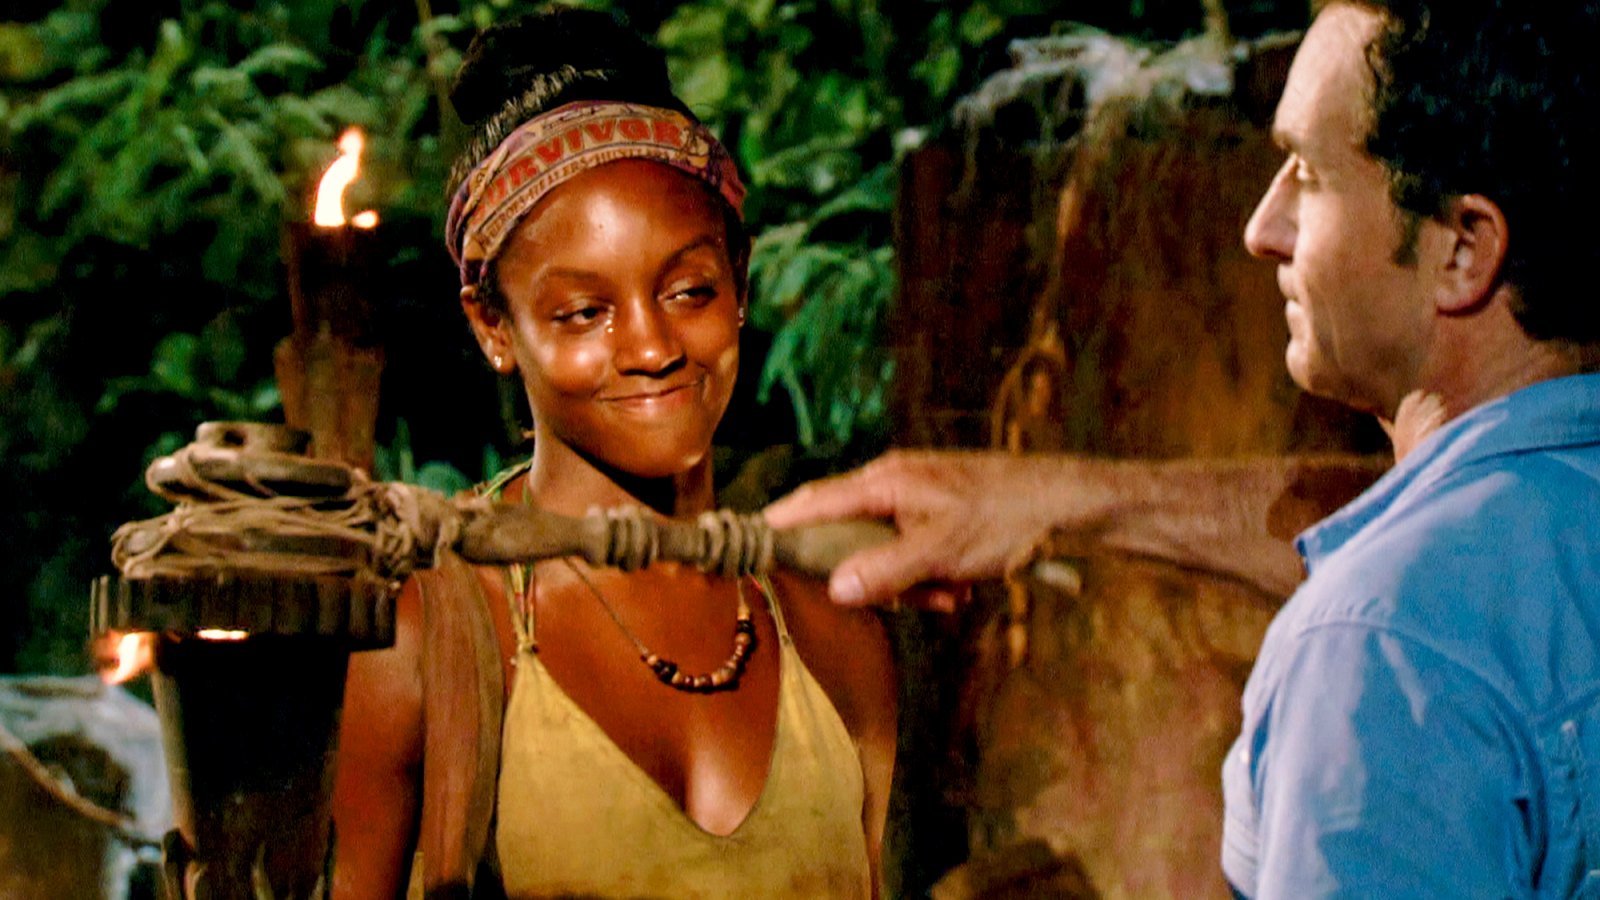 Jeff Probst extinguishes Desi Williams torch at Tribal Council on the eighth episode of Survivor themed Heroes vs. Healers vs. Hustlers